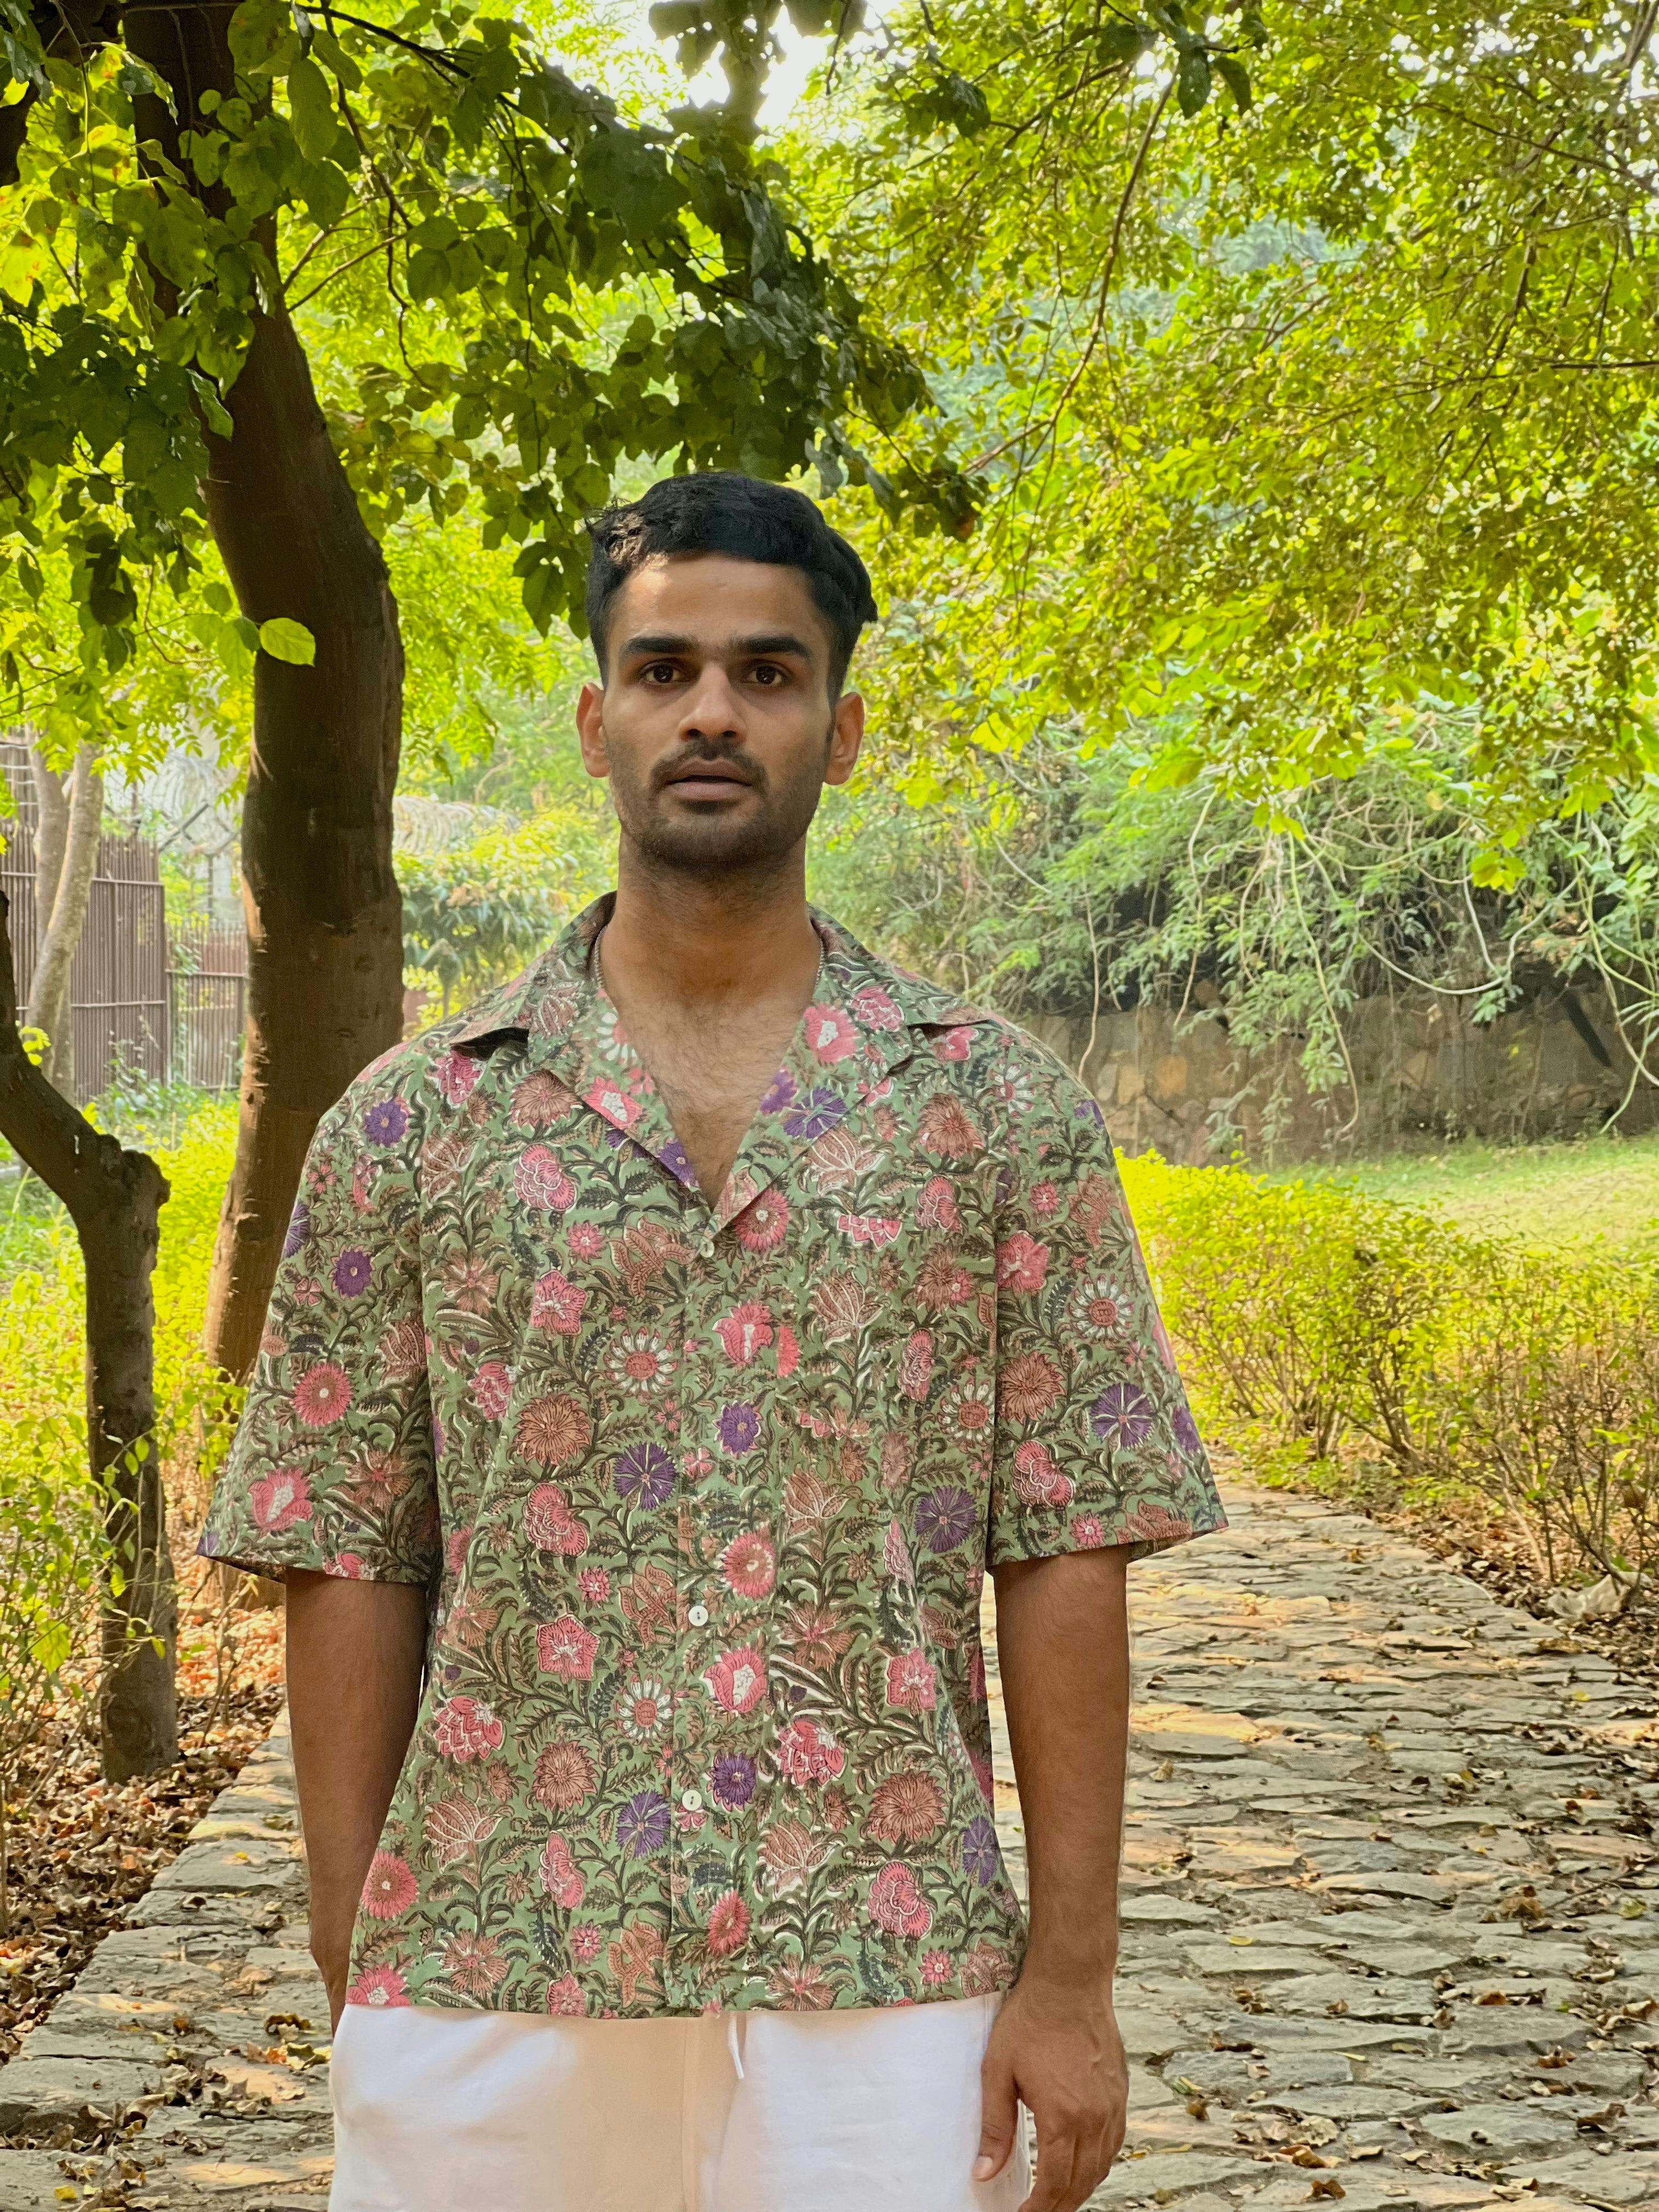 Hand Block Printed 100% Cotton Shirt - Mughal Vines, a product by izsi